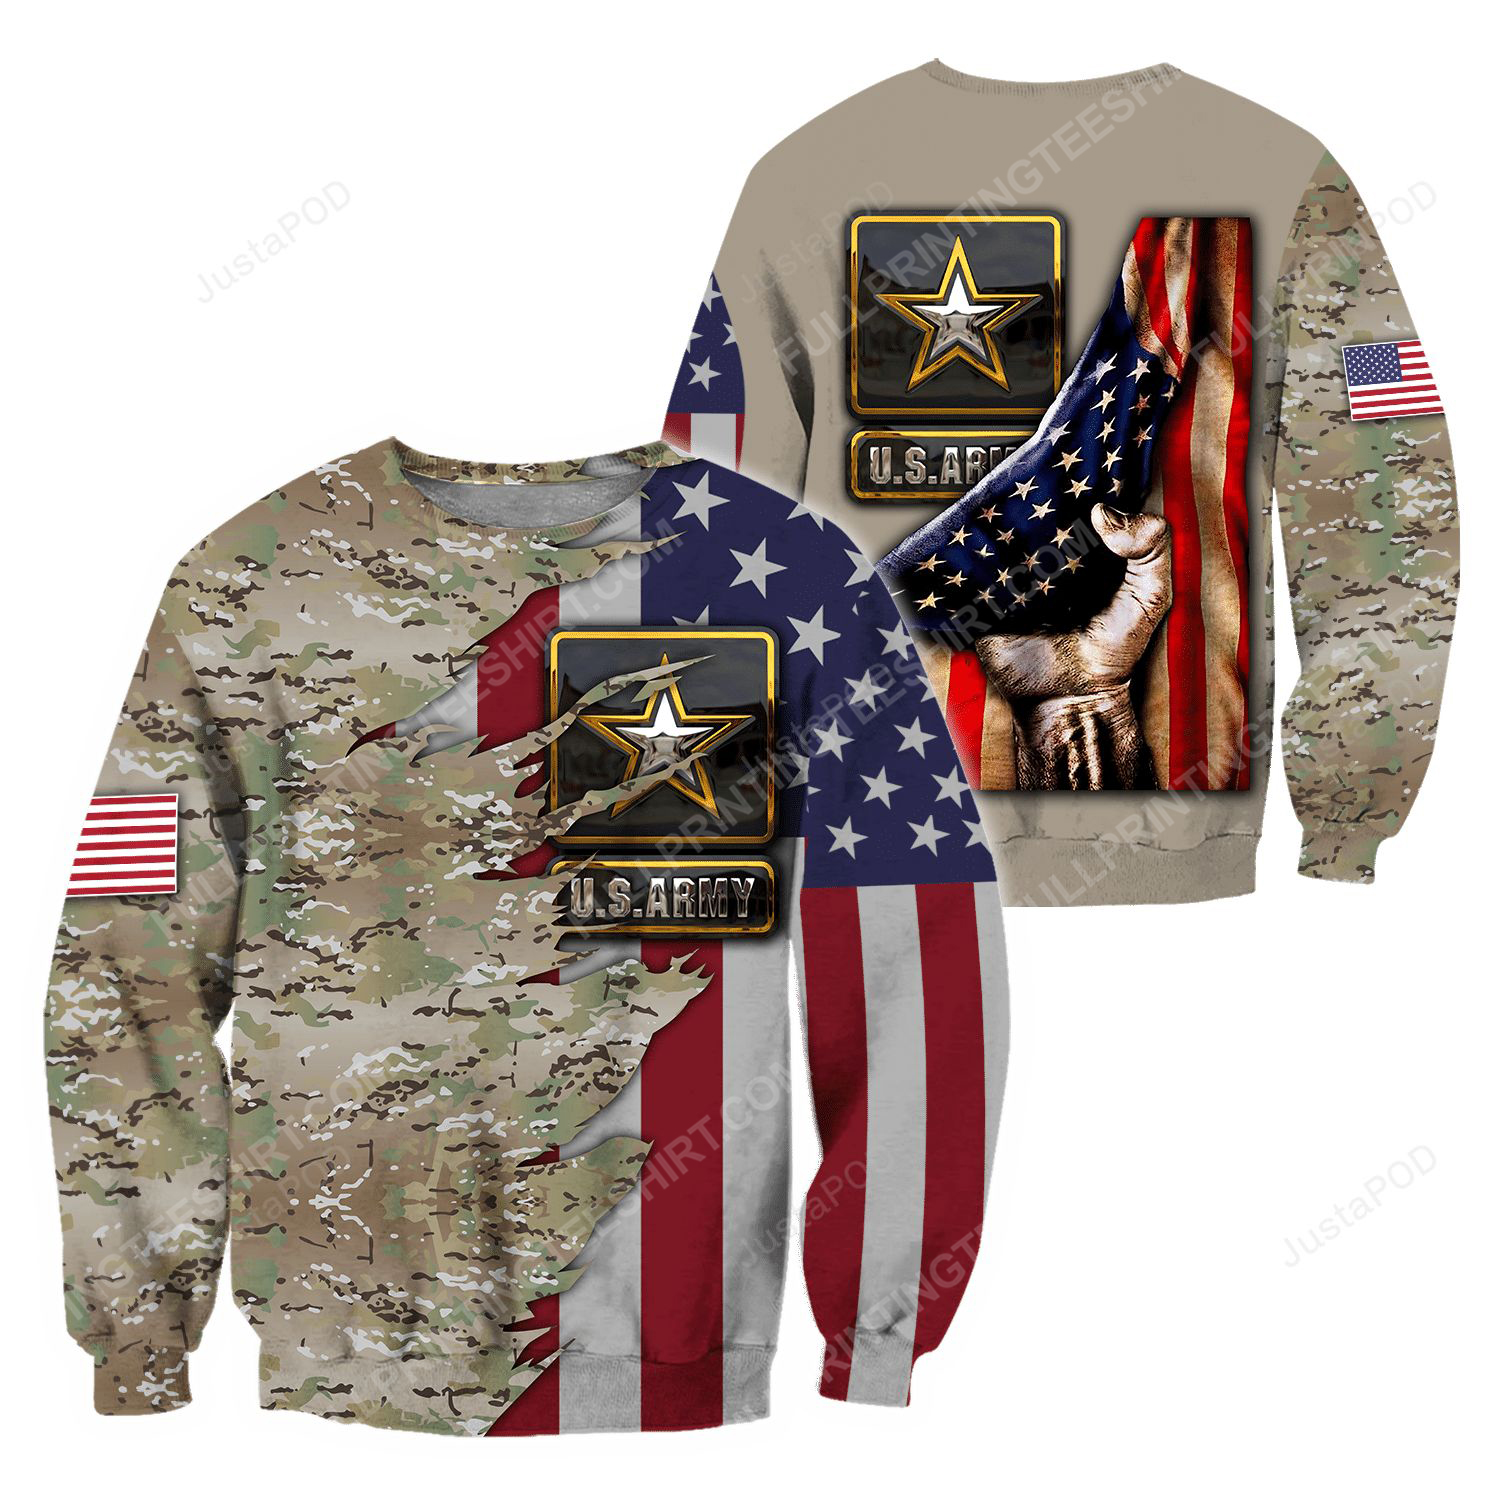 The united states army full print ugly christmas sweater